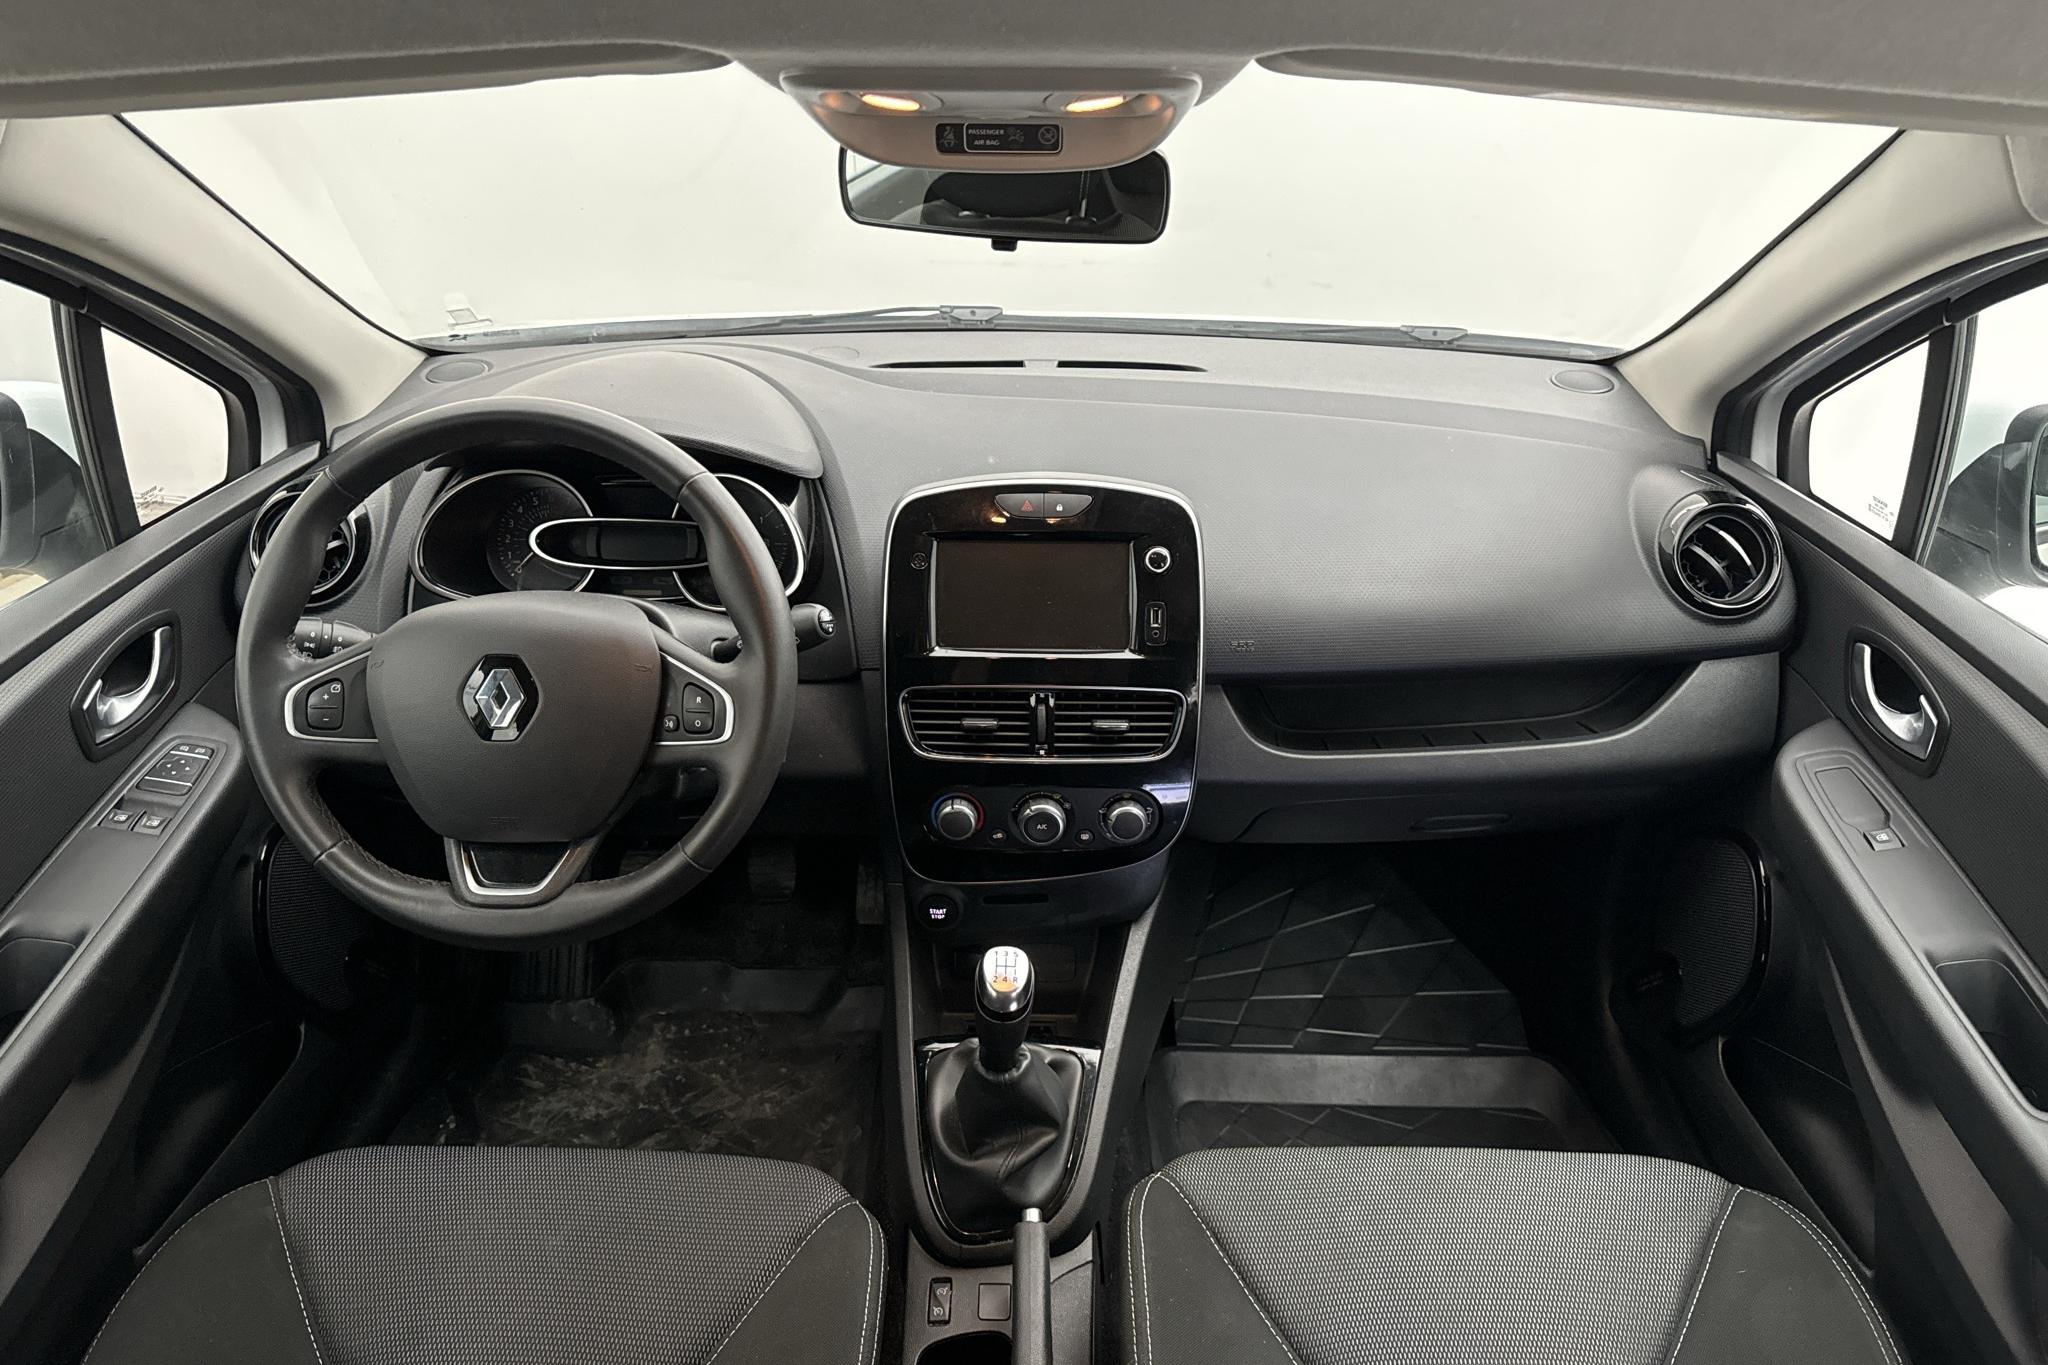 Renault Clio IV 0.9 TCe 90 5dr (90hk) - 93 630 km - Manual - white - 2020